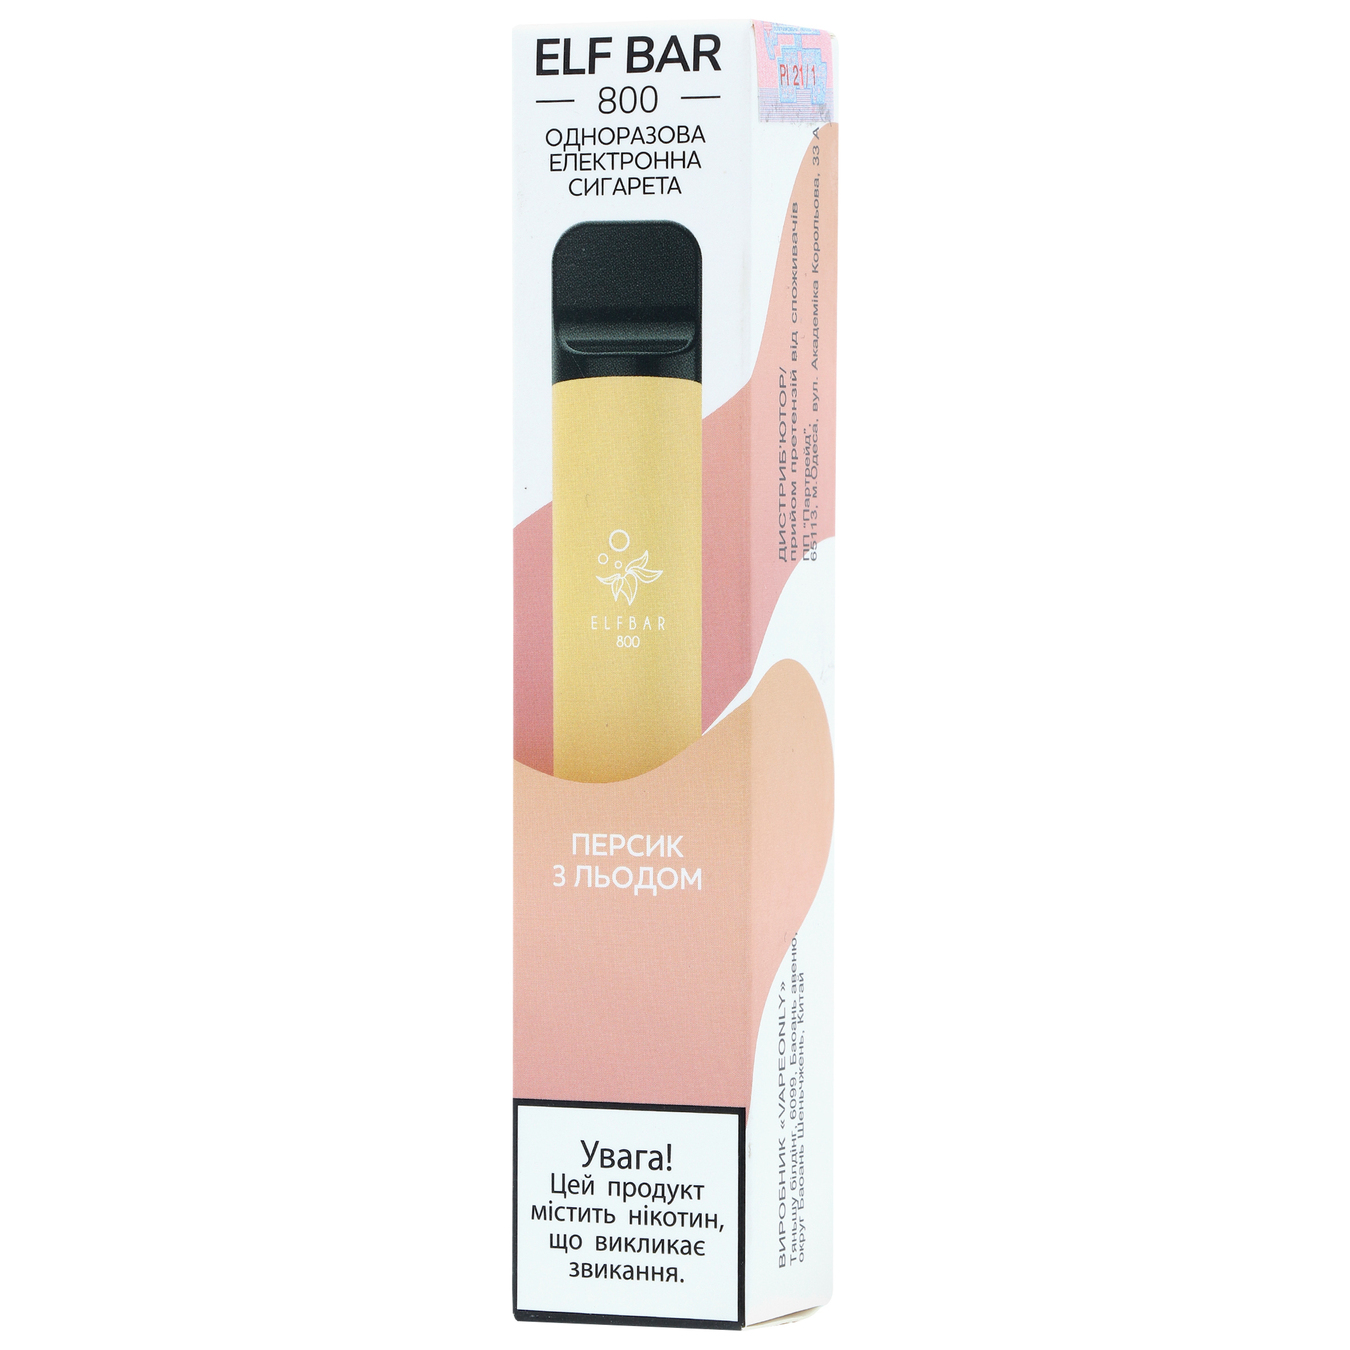 Elf Bar Electronic cigarette 800 Peach with ice disposable 1pc (the price is indicated without excise tax)